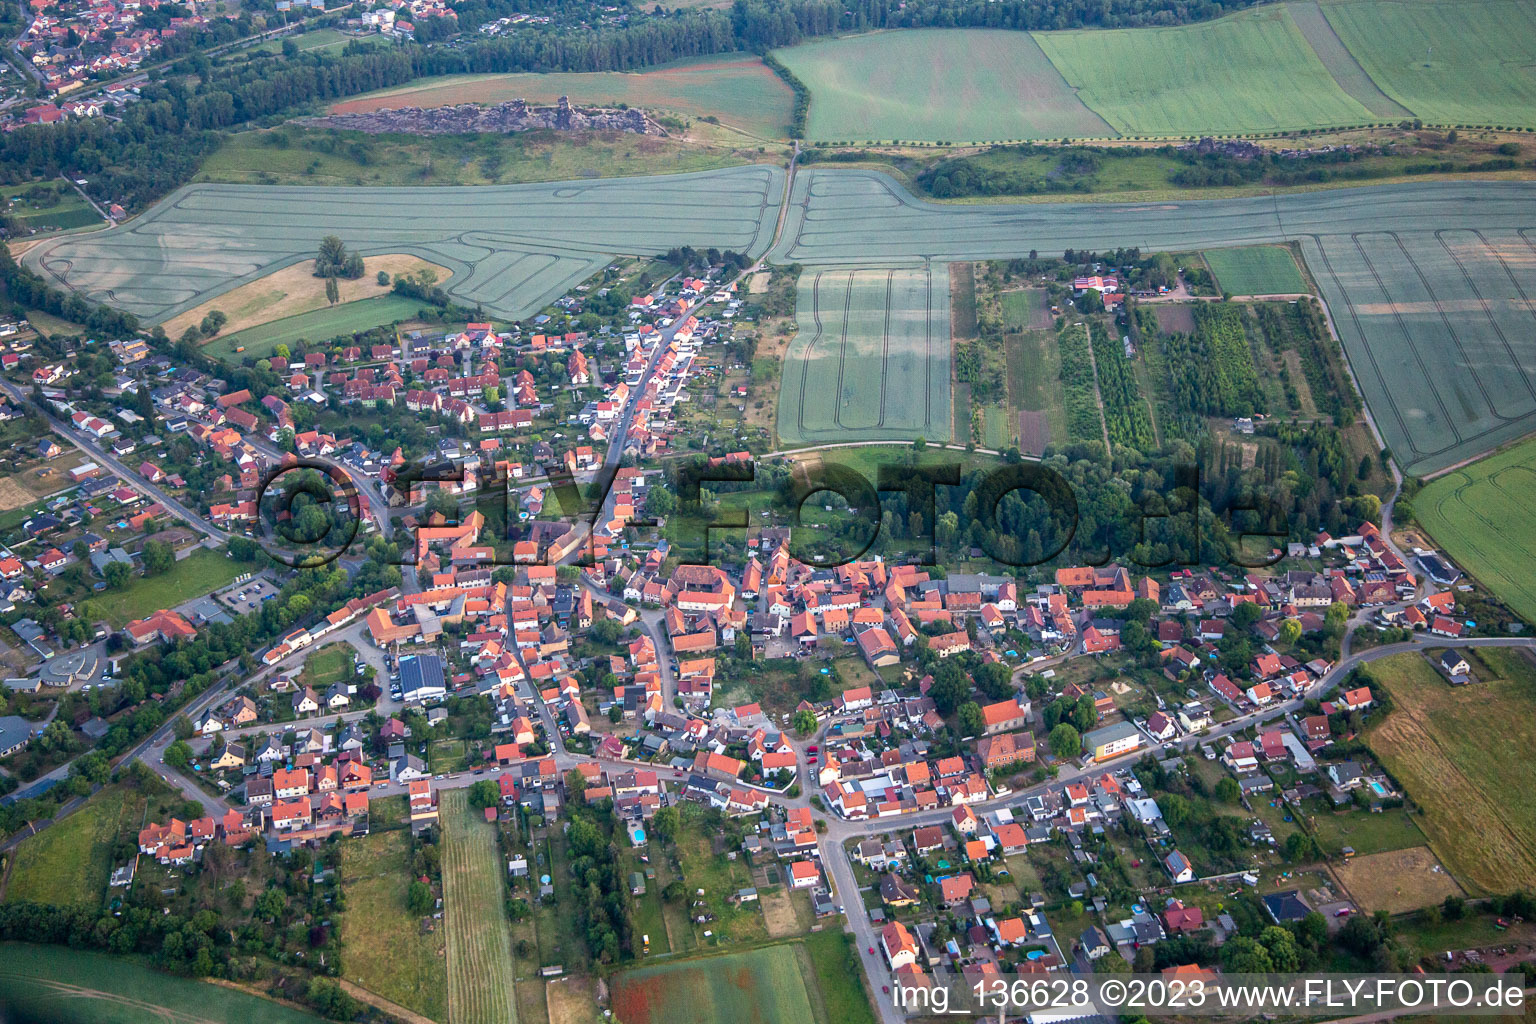 From the north in the district Weddersleben in Thale in the state Saxony-Anhalt, Germany